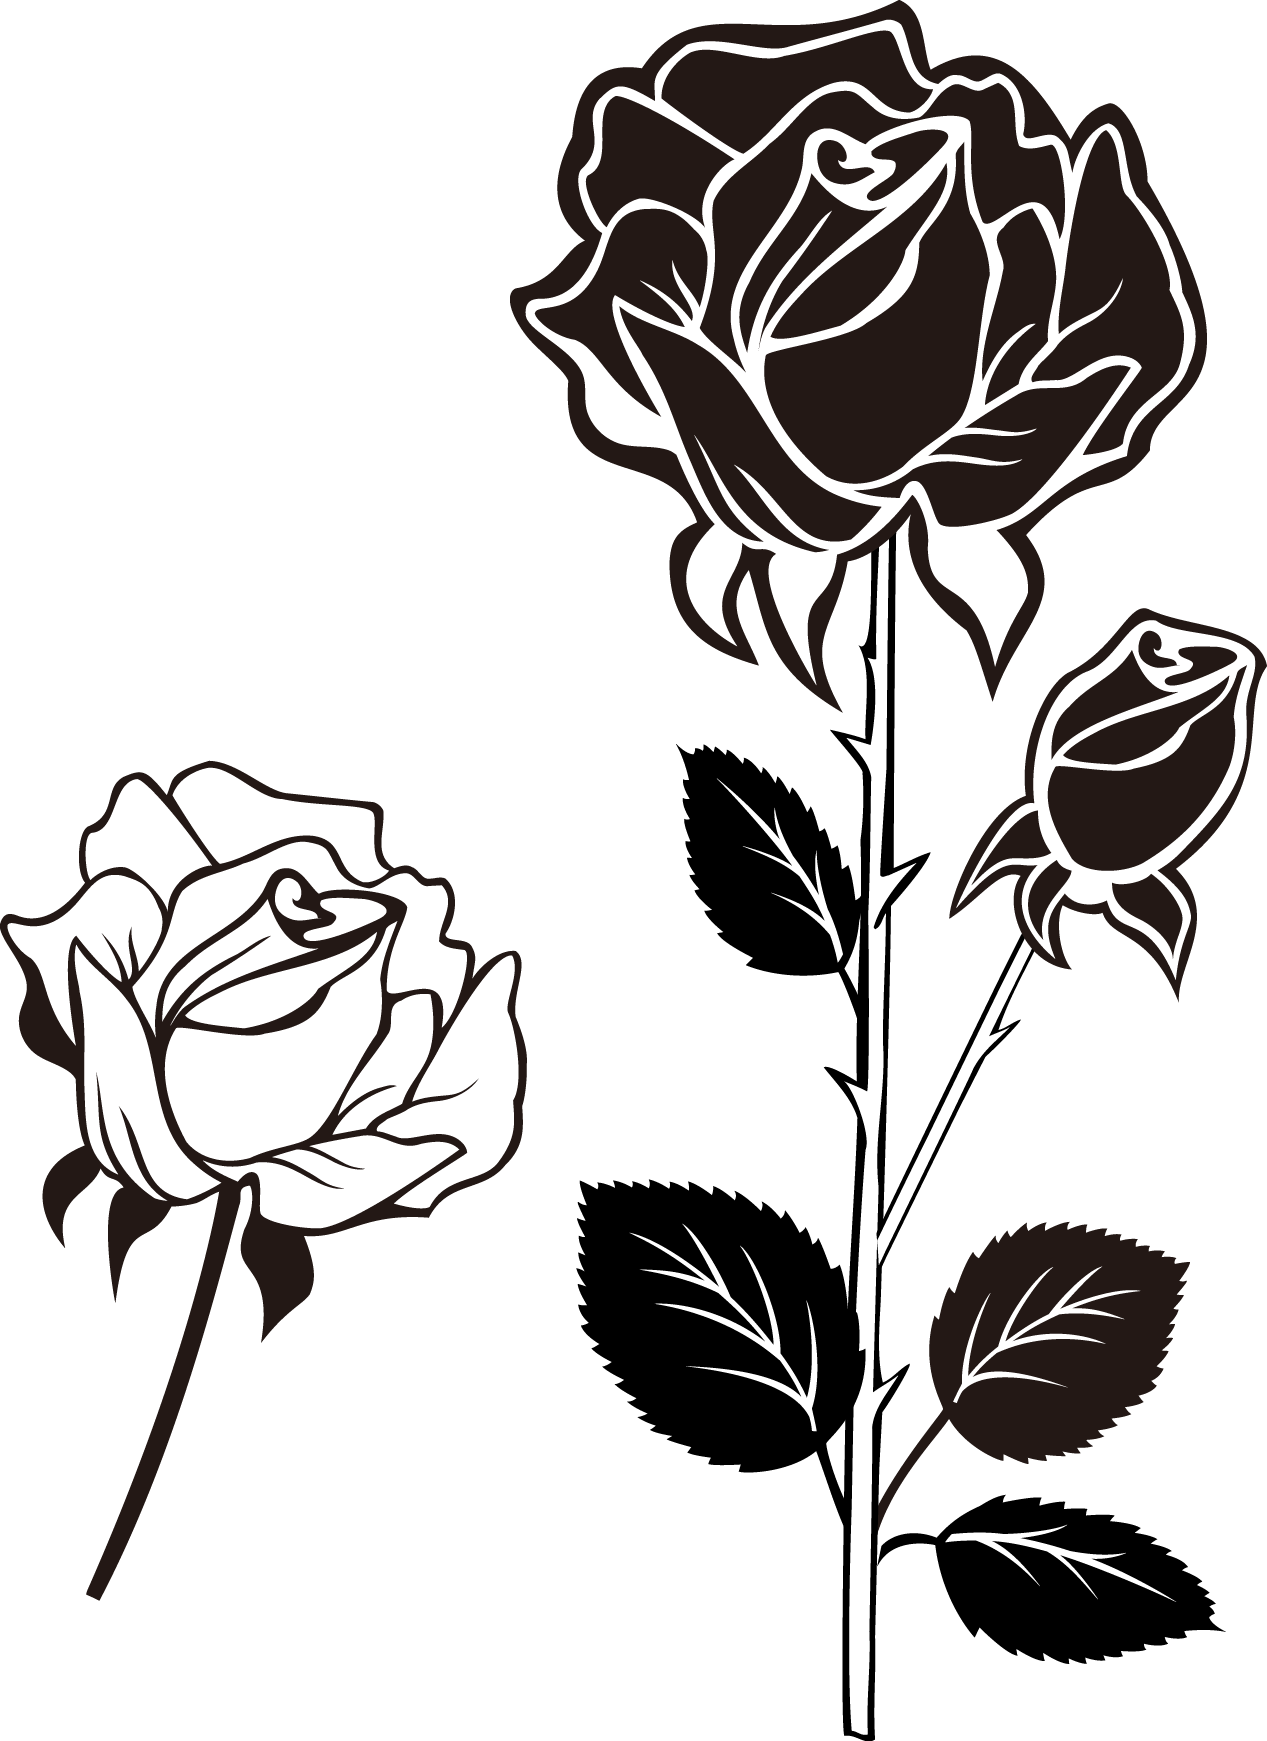 Stylized Blackand White Roses PNG image